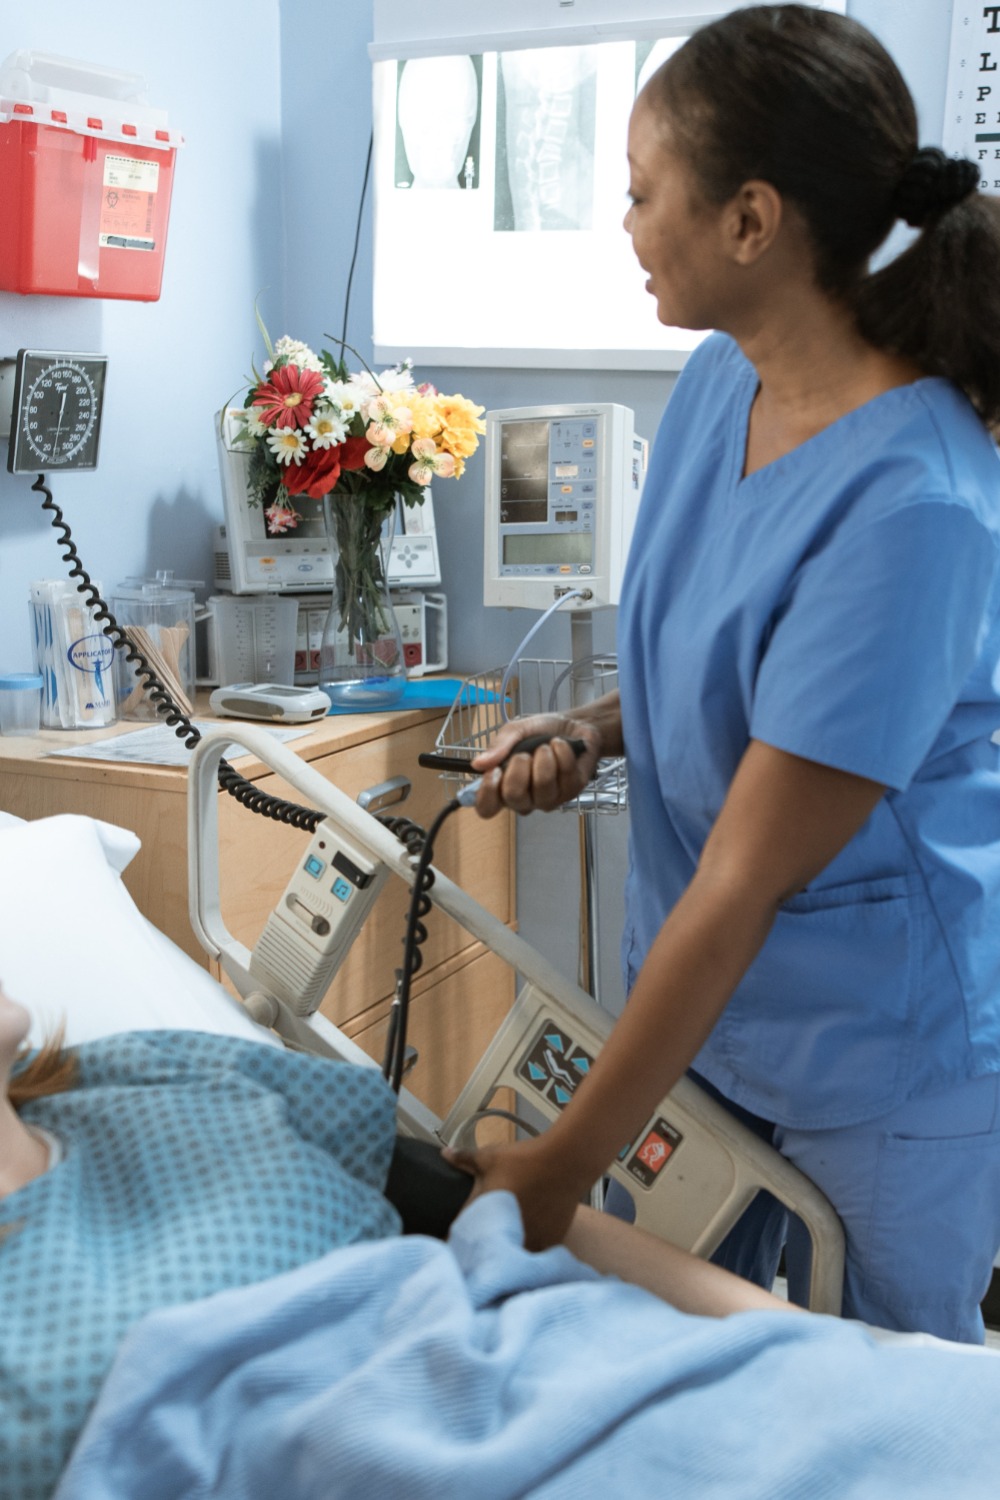 Nurse caring for someone in hospital bed